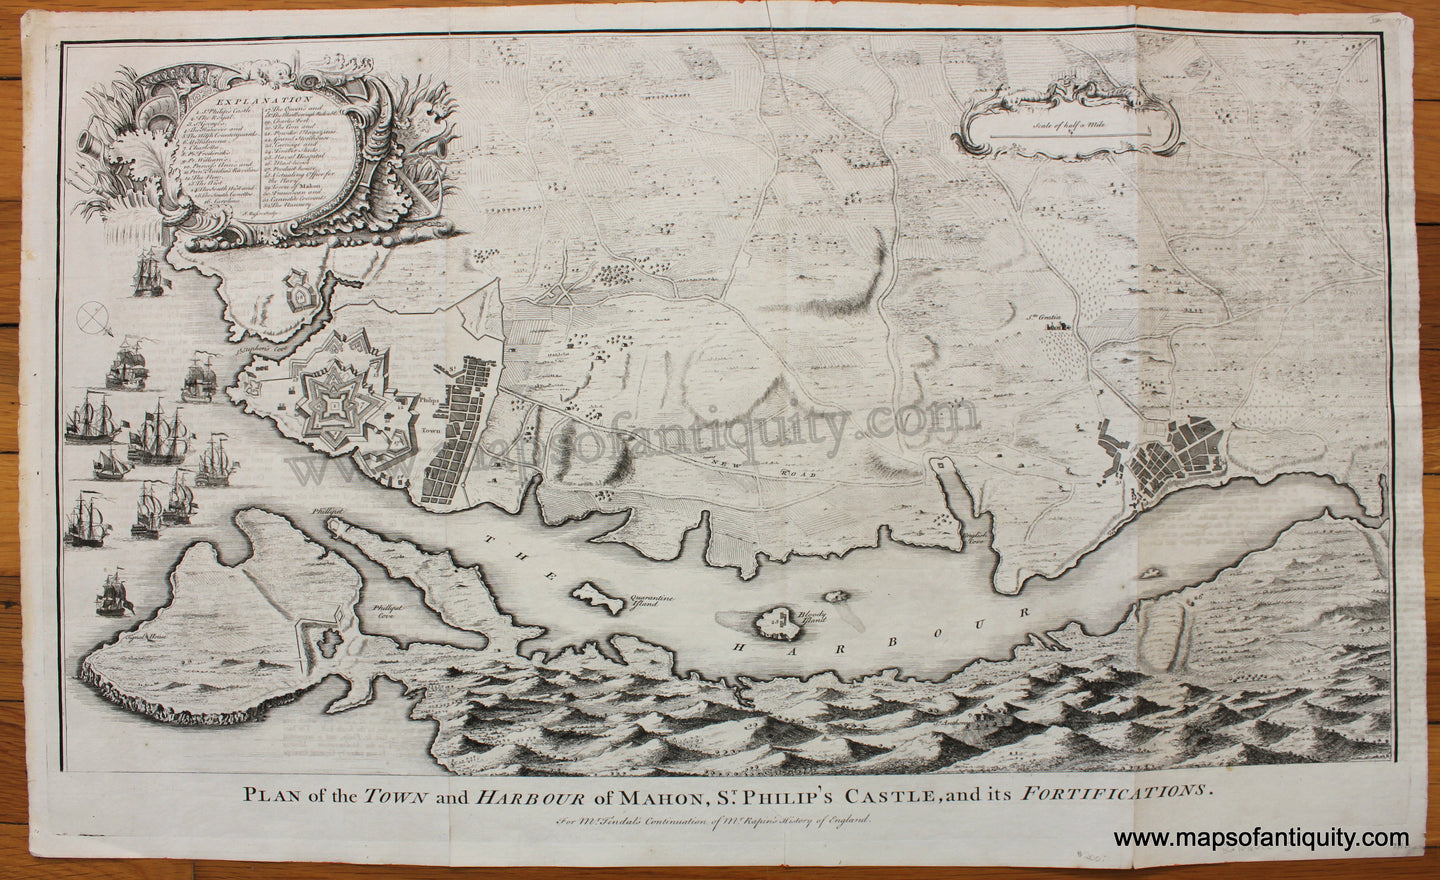 Antique-Black-and-White-Map-Plan-of-the-Town-and-Harbour-of-Mahon-St.-Philip's-Castle-and-its-Fortifications.-1745-Basire-Tindal-Rapin-1700s-18th-century-Maps-of-Antiquity